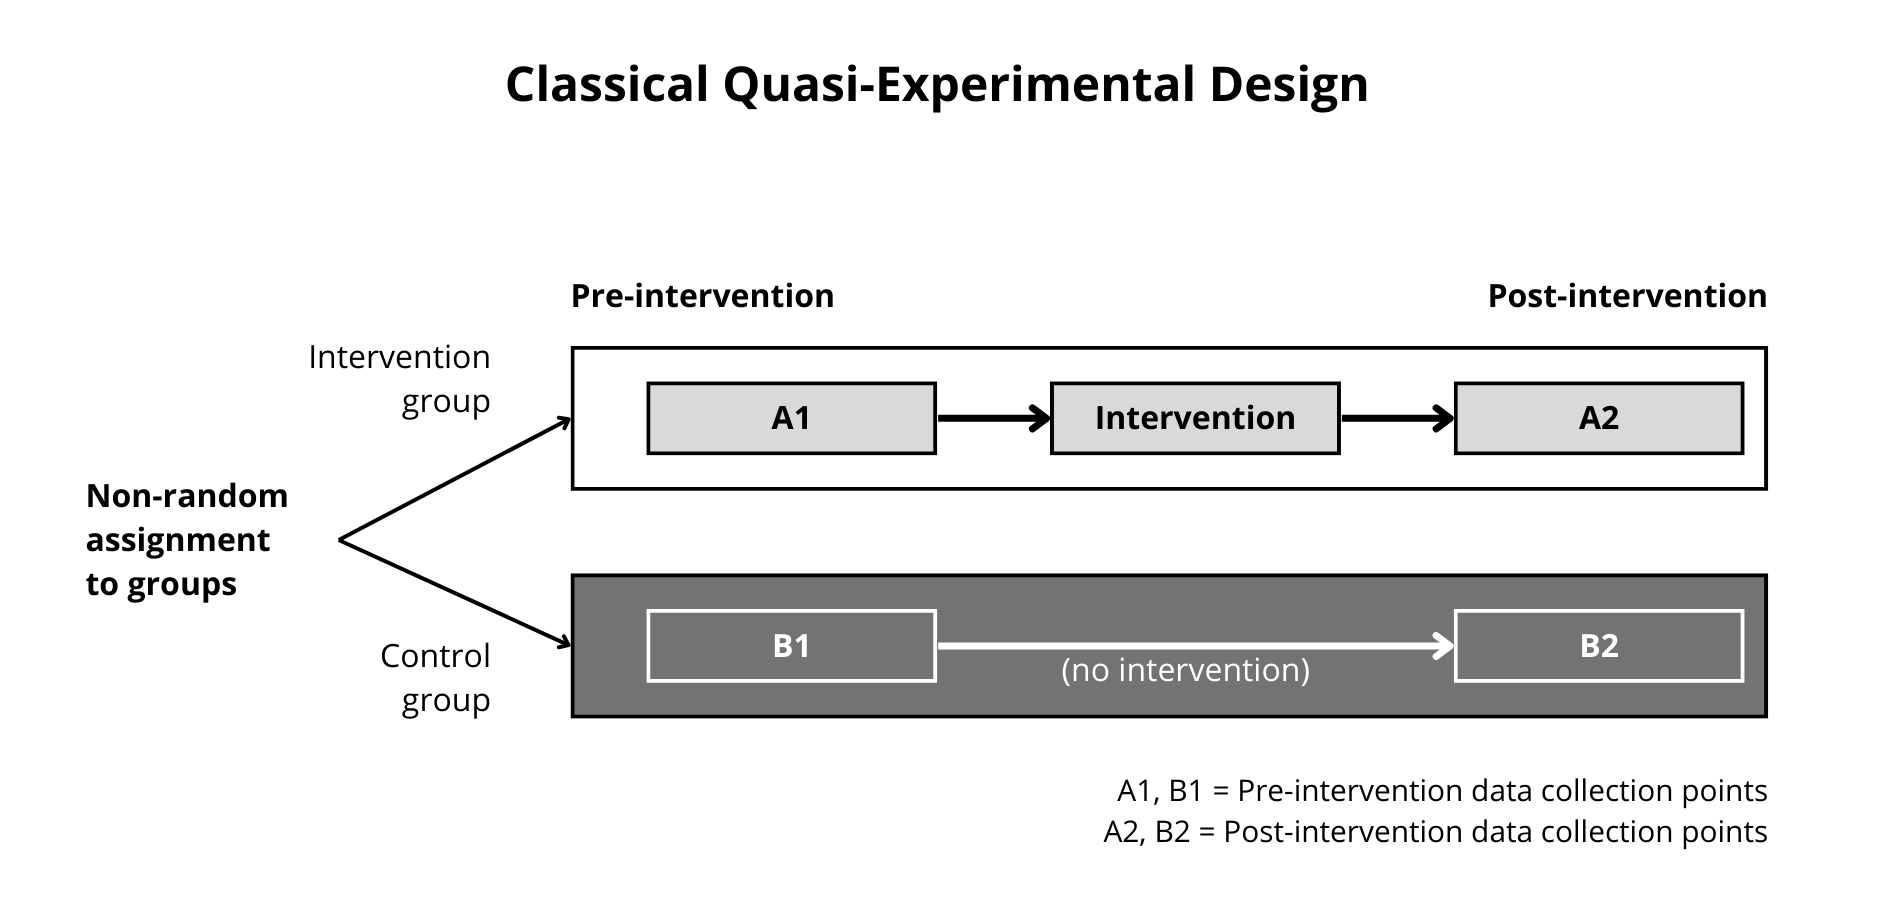 Figure 5. Classical Quasi-Experimental Design. Adapted from https://www.k4health.org/toolkits/measuring-success/types-evaluation-designs